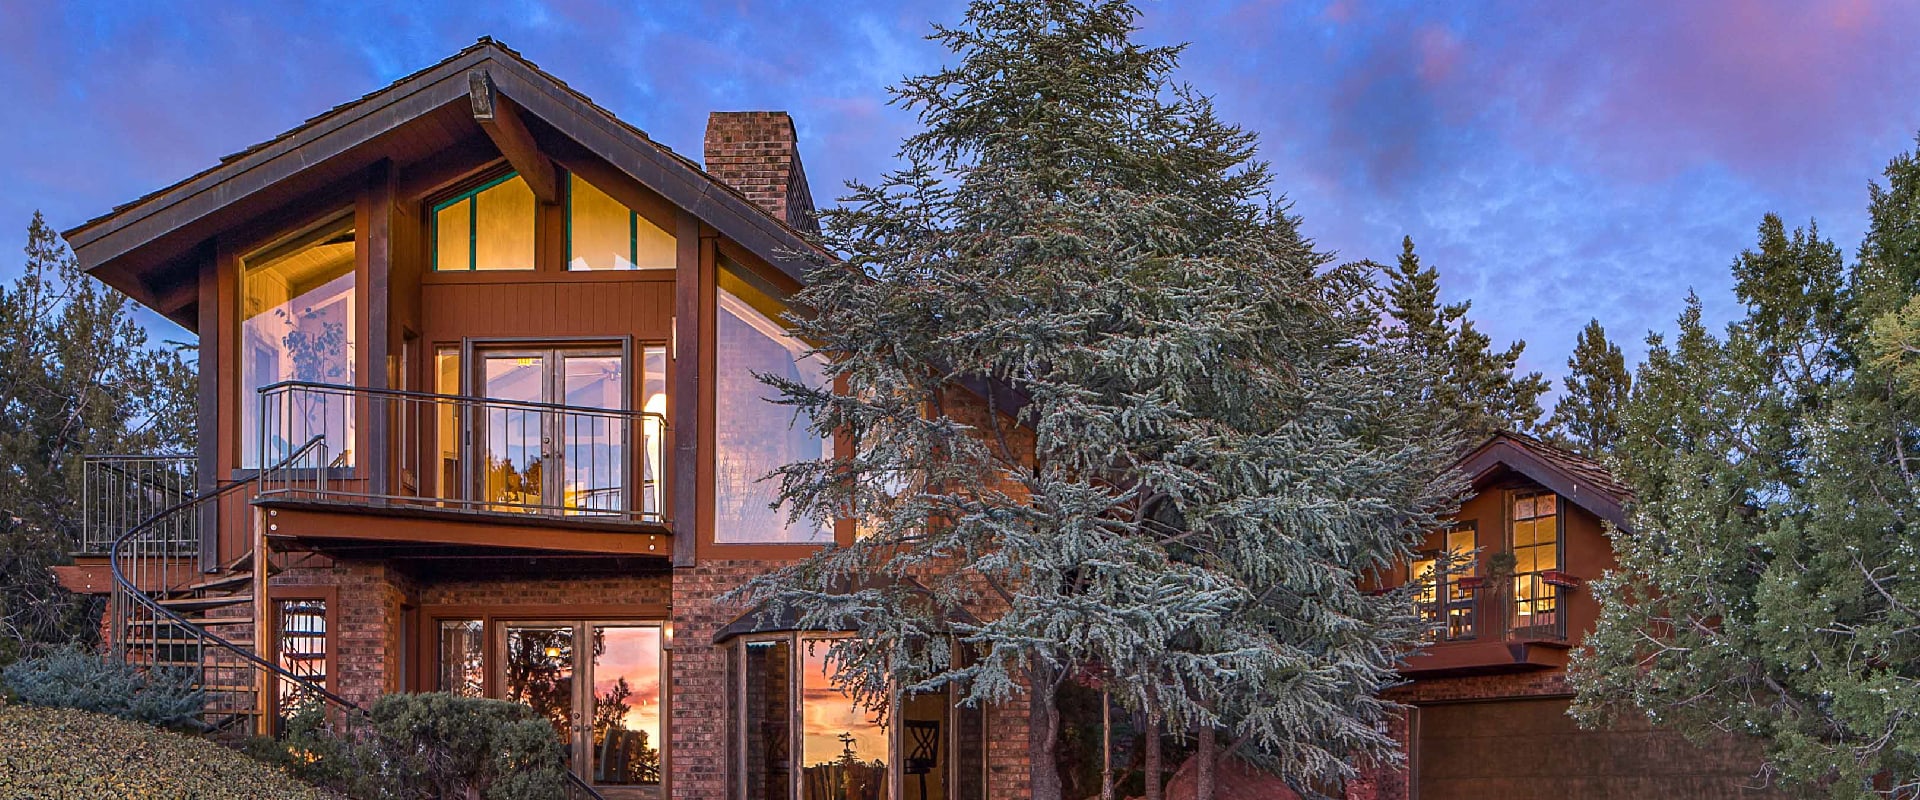 Photo of a stunning vacation rental at dusk with the lights on in Sedona, Arizona.